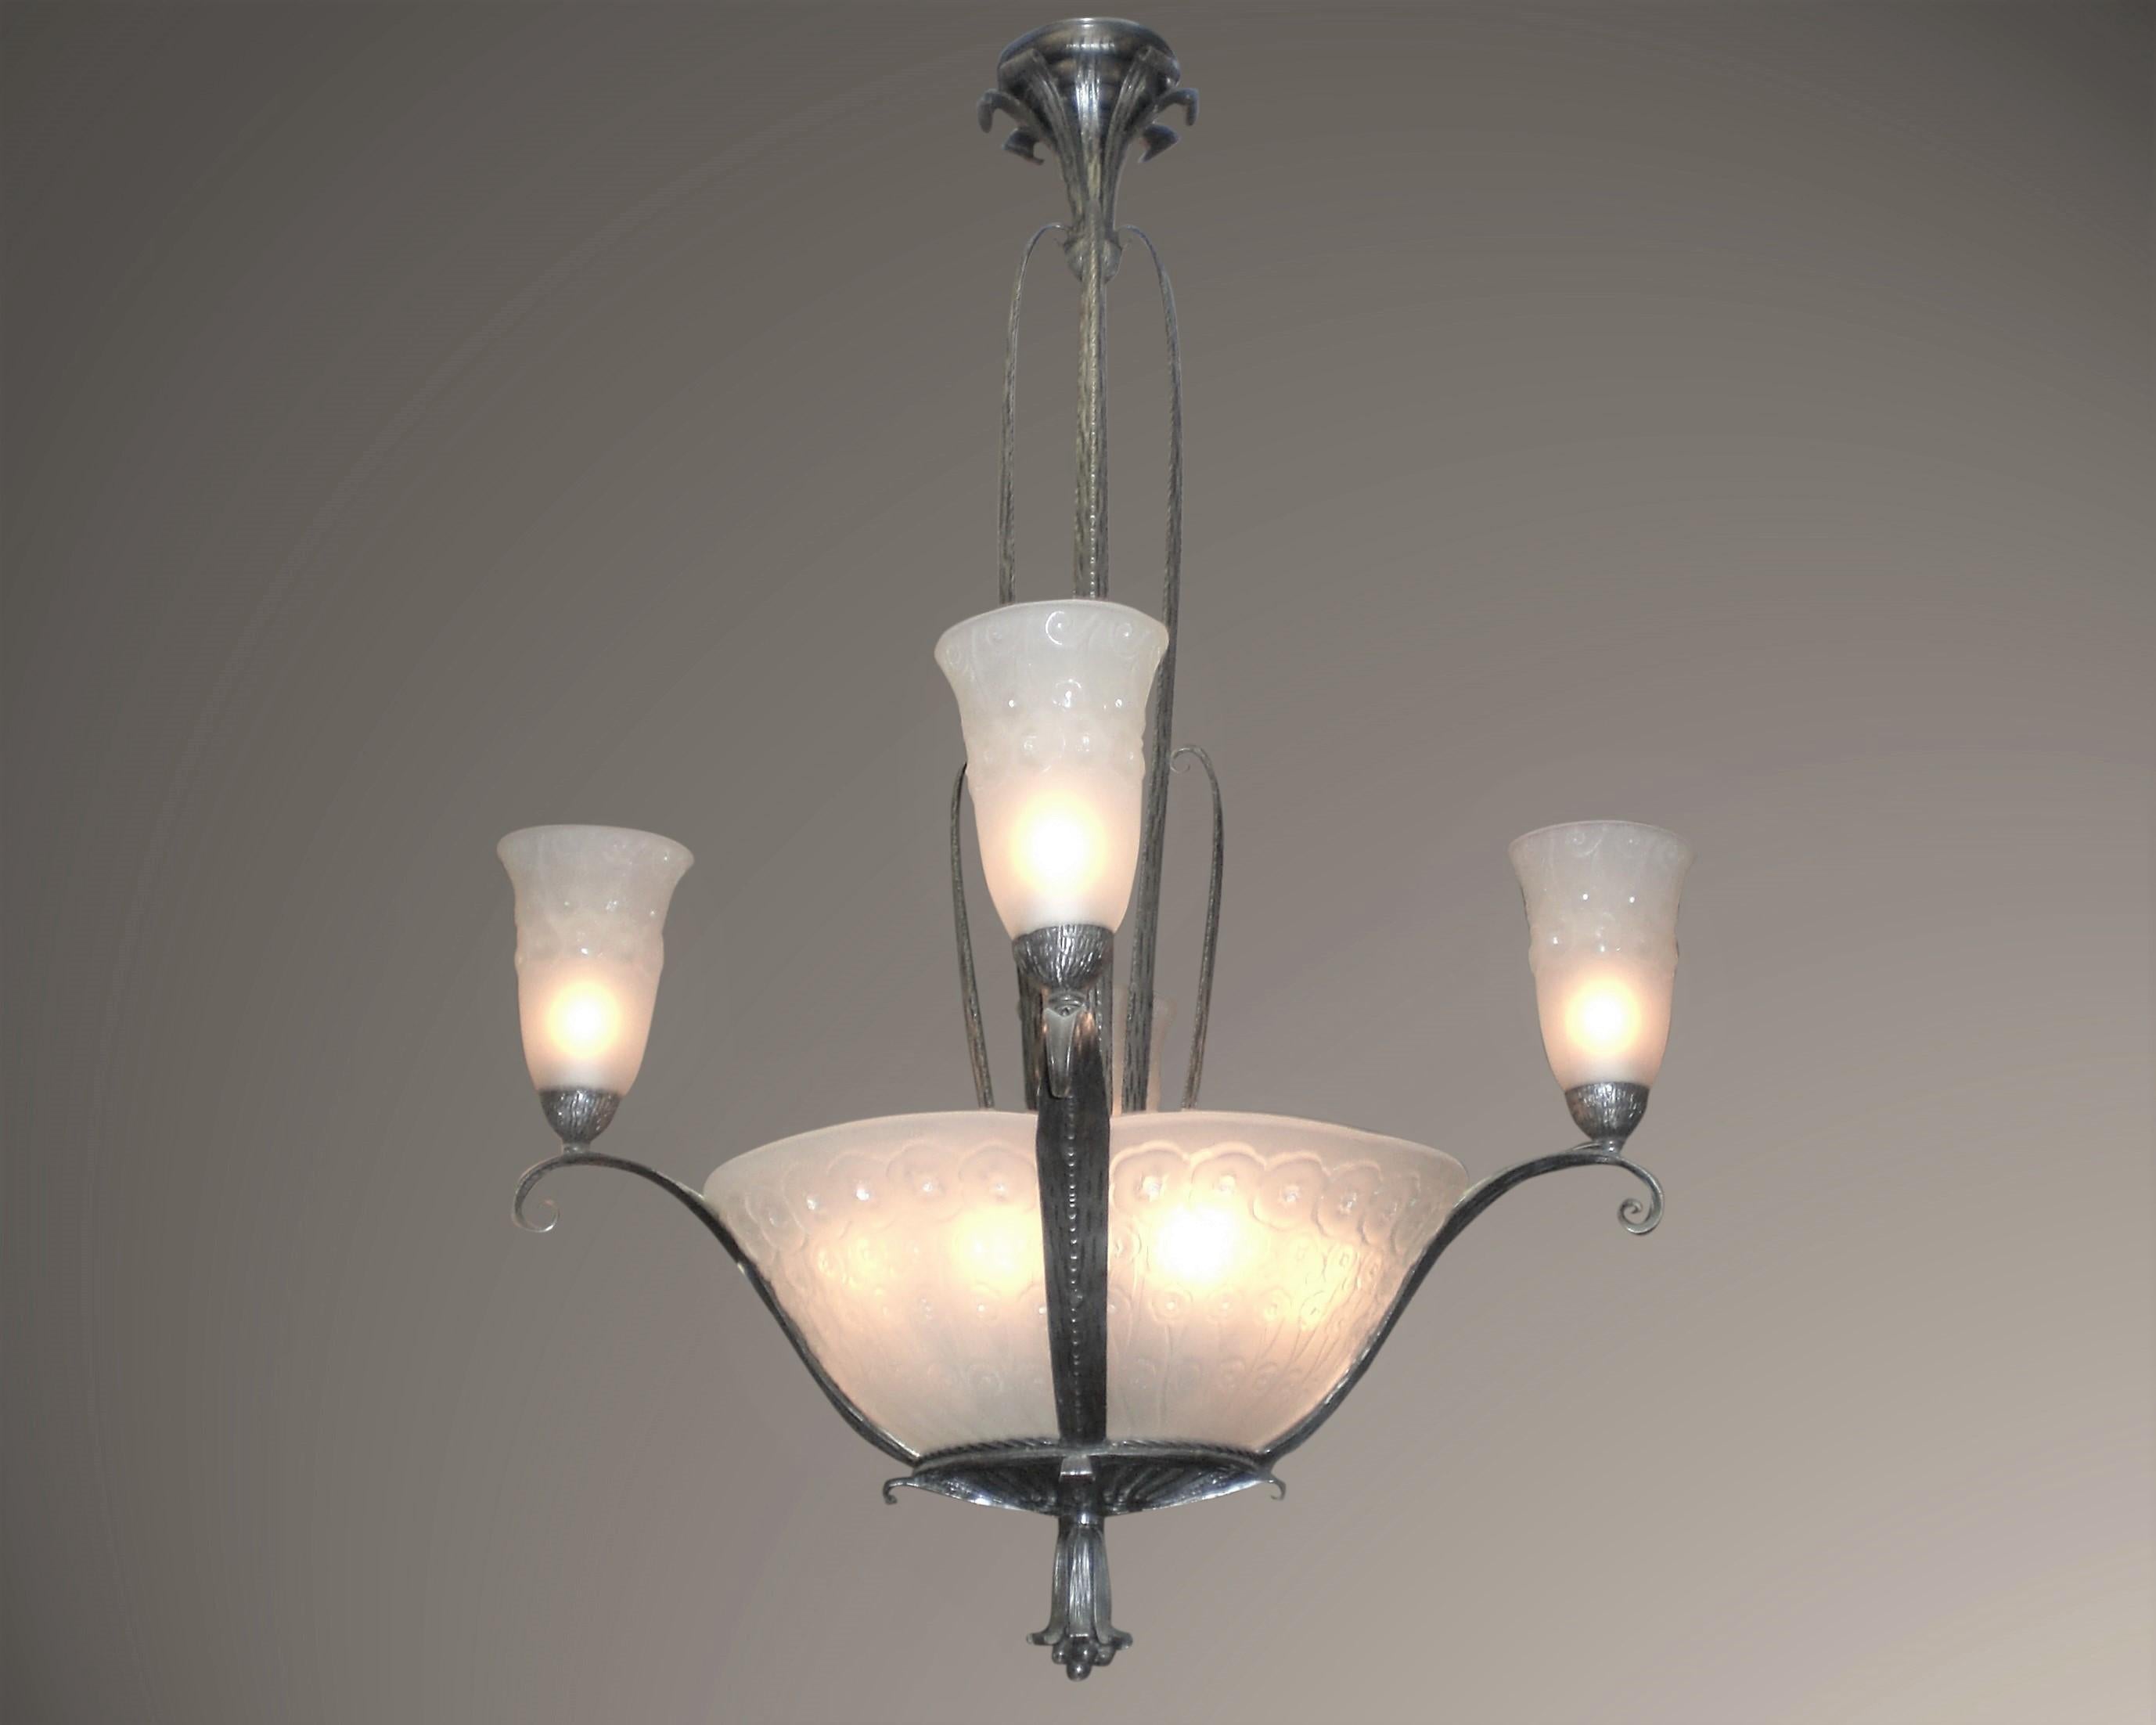 Elegant French Art Deco hand hammered iron and glass chandelier featuring four panels and four matching tulips. The original hand forged iron armature displays a tiered waterfall scroll stem and delicate mount ending in a blossoming tulip finial.